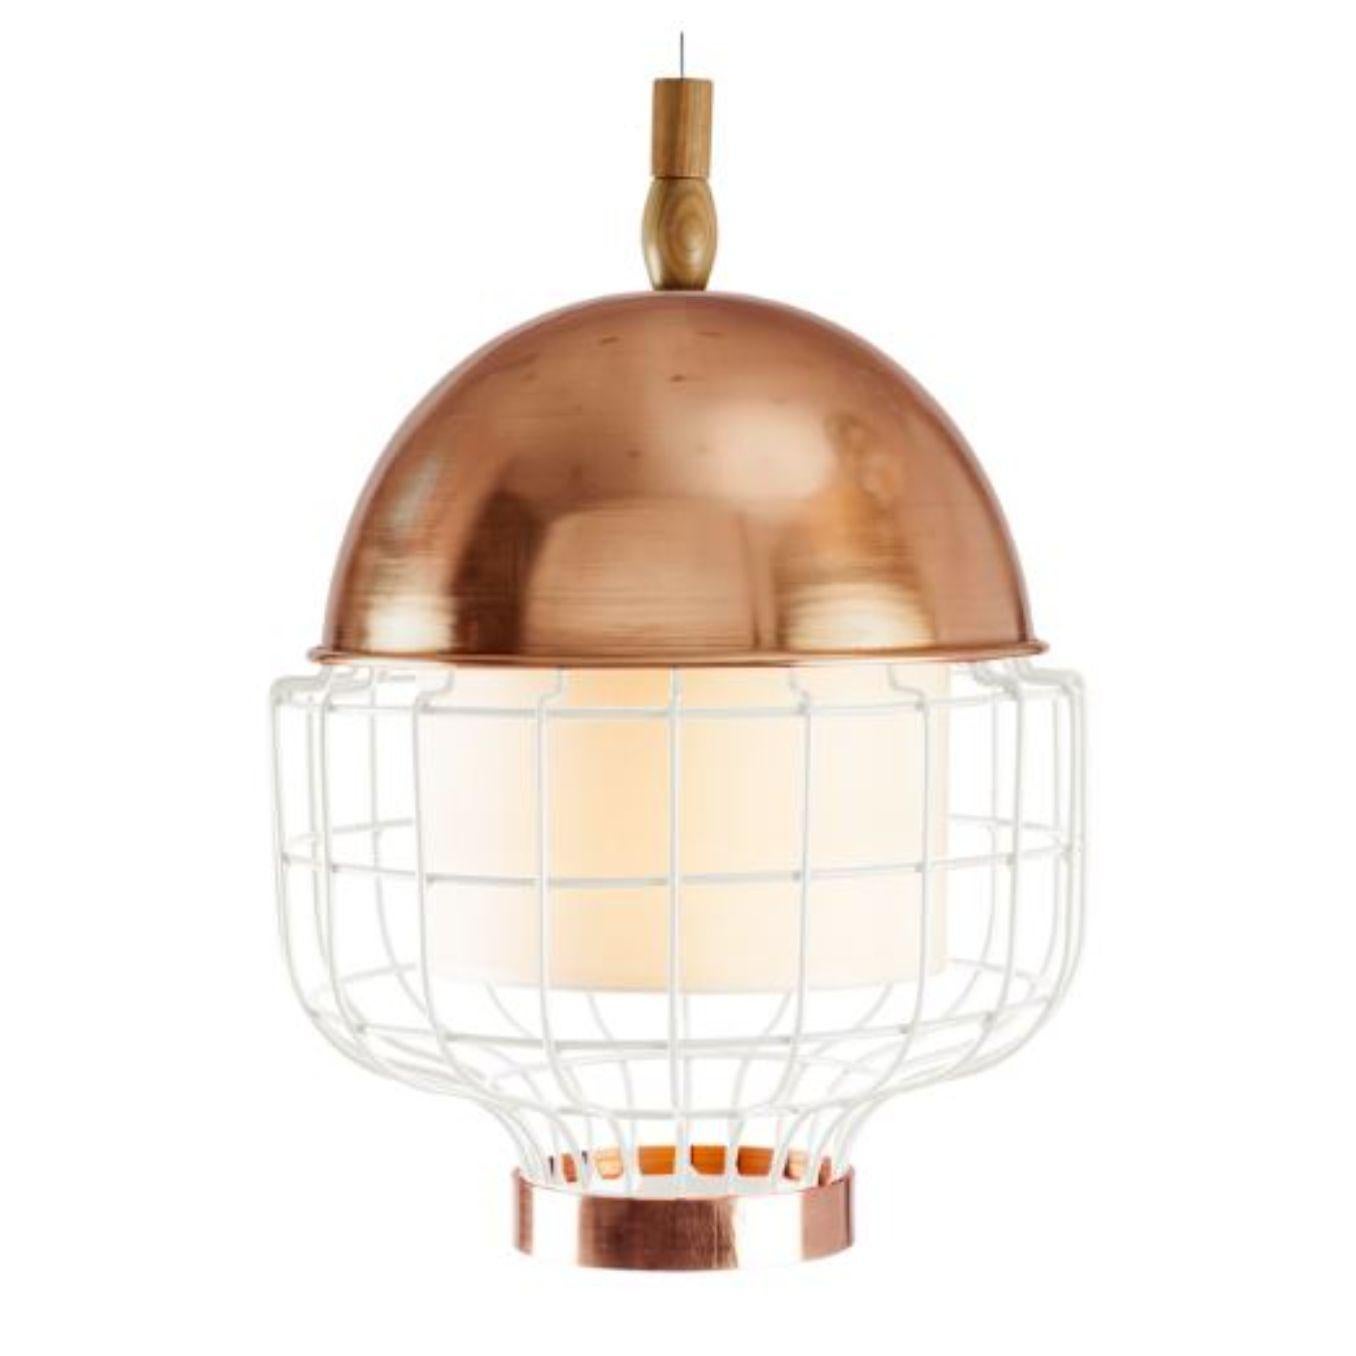 Copper Black Magnolia III Suspension Lamp with Copper Ring by Dooq For Sale 1